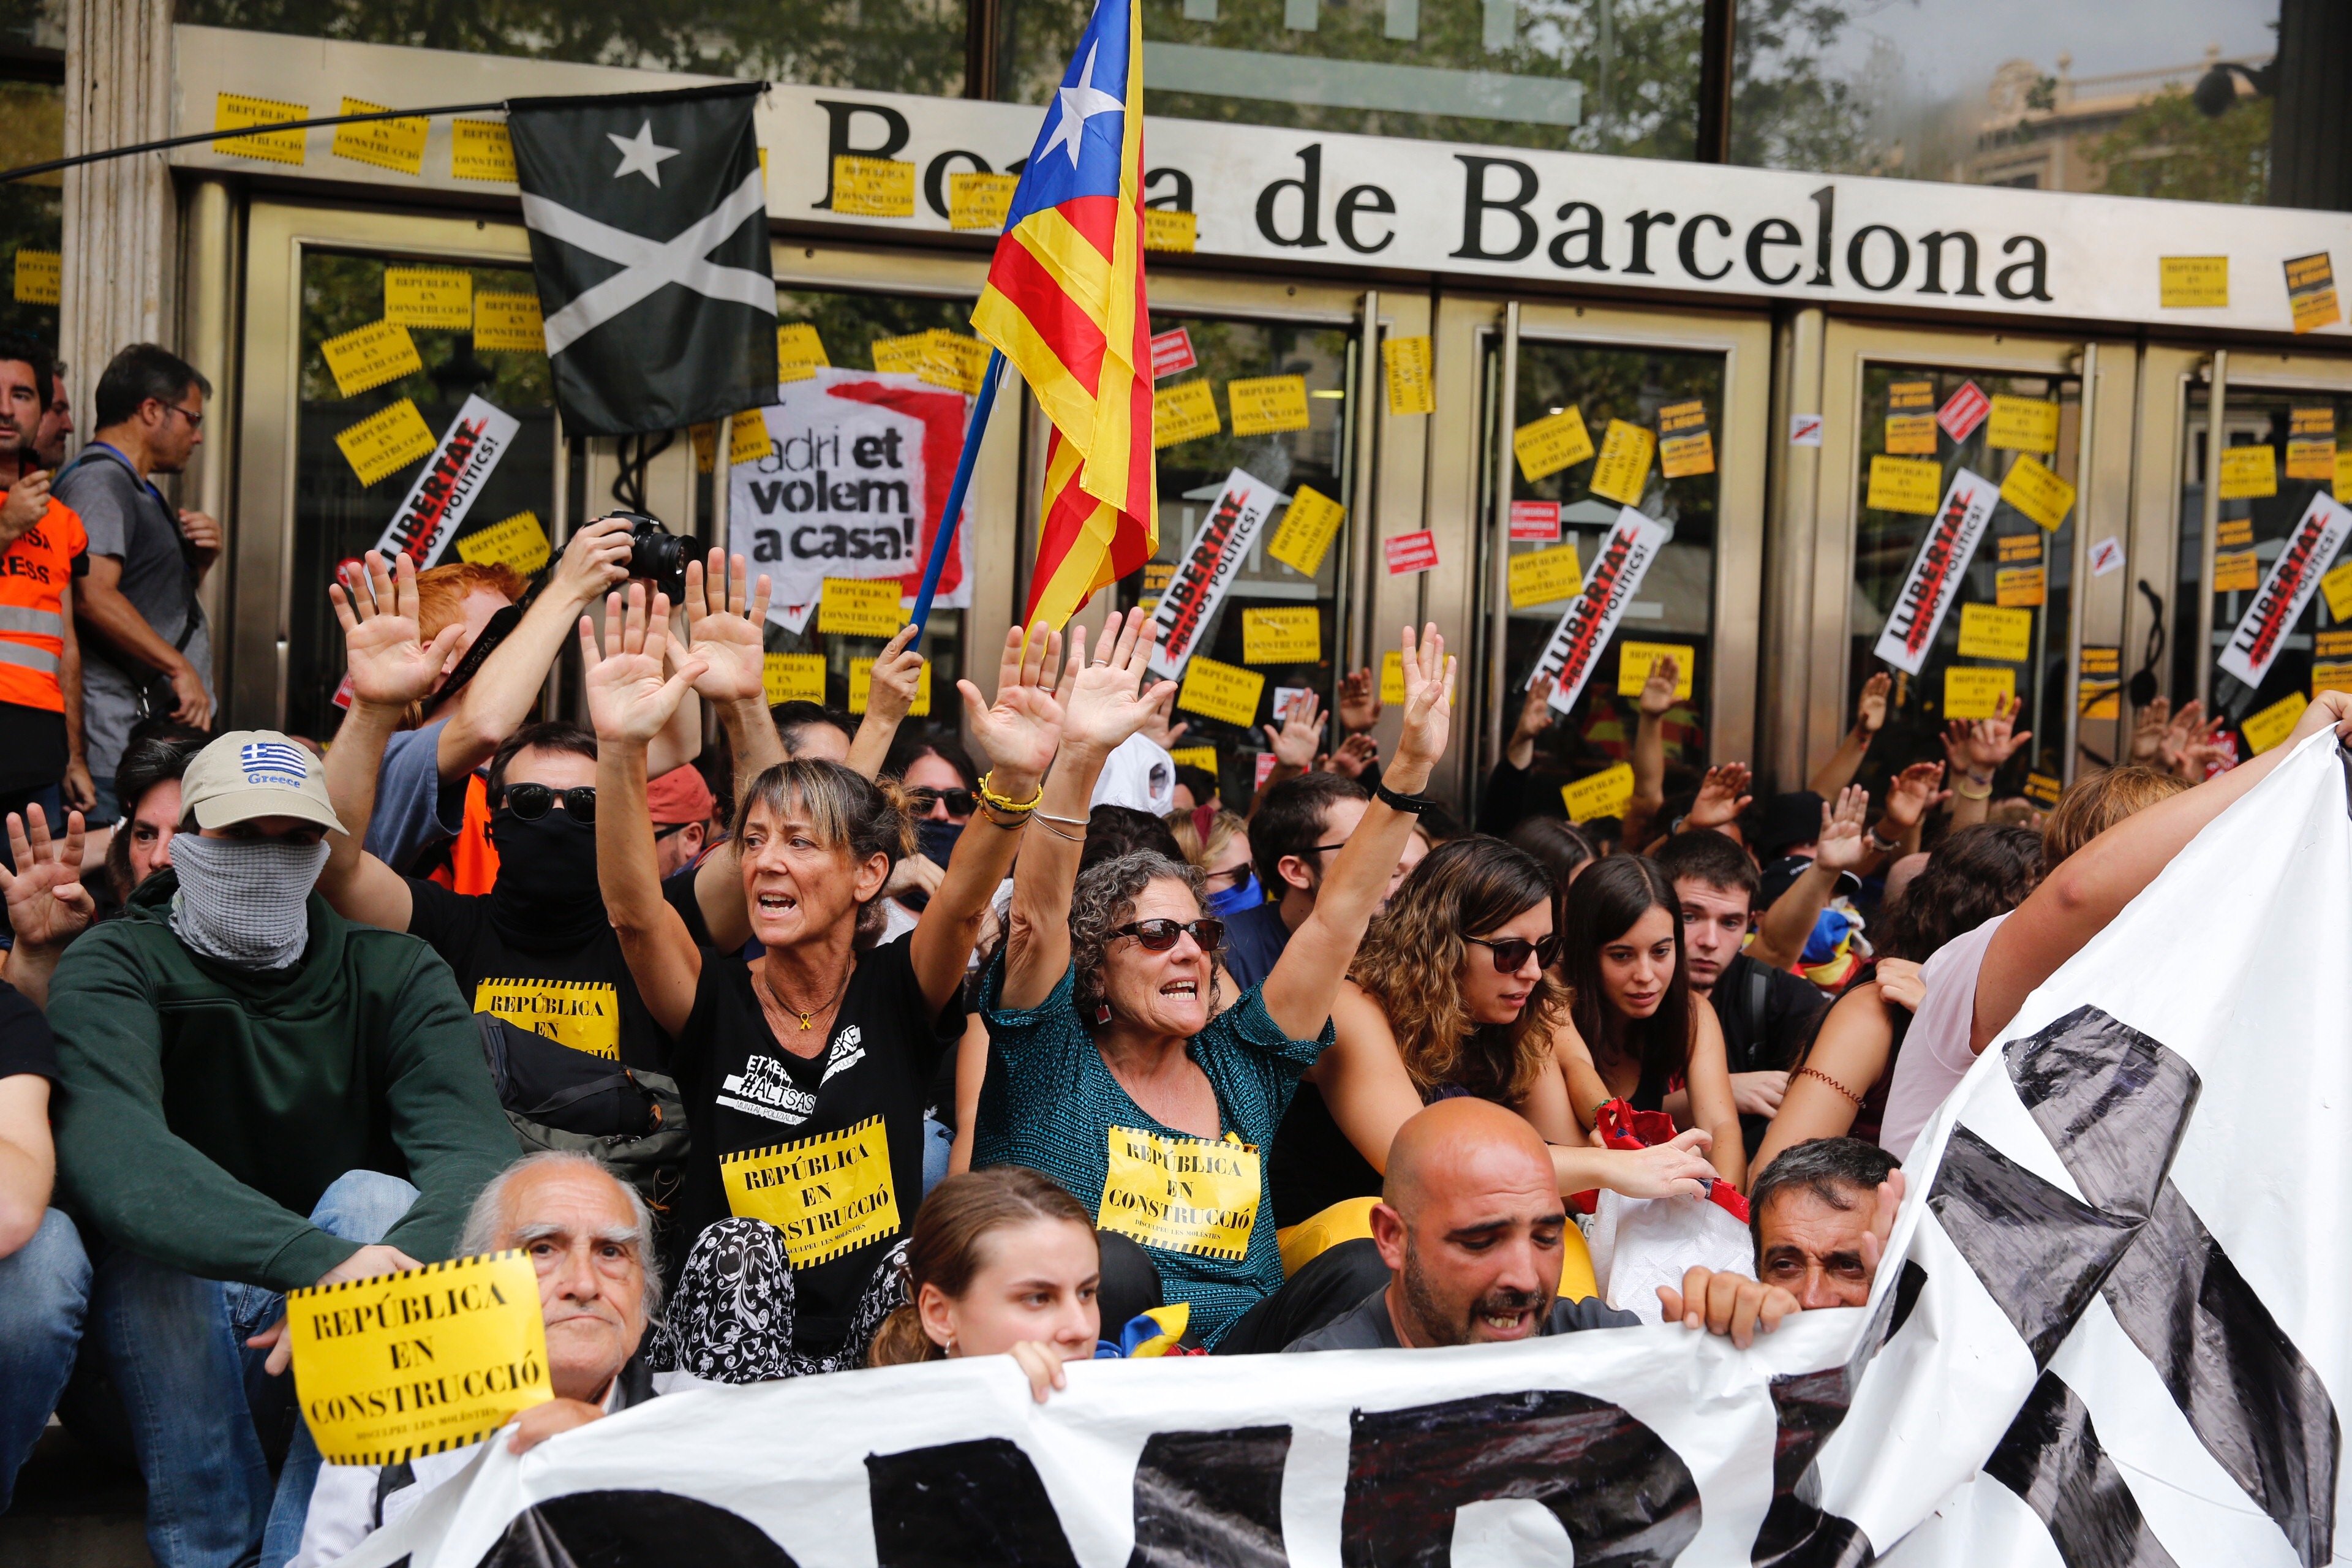 Barcelona Stock Exchange blocked by protesters who call for Torra, interior minister to resign